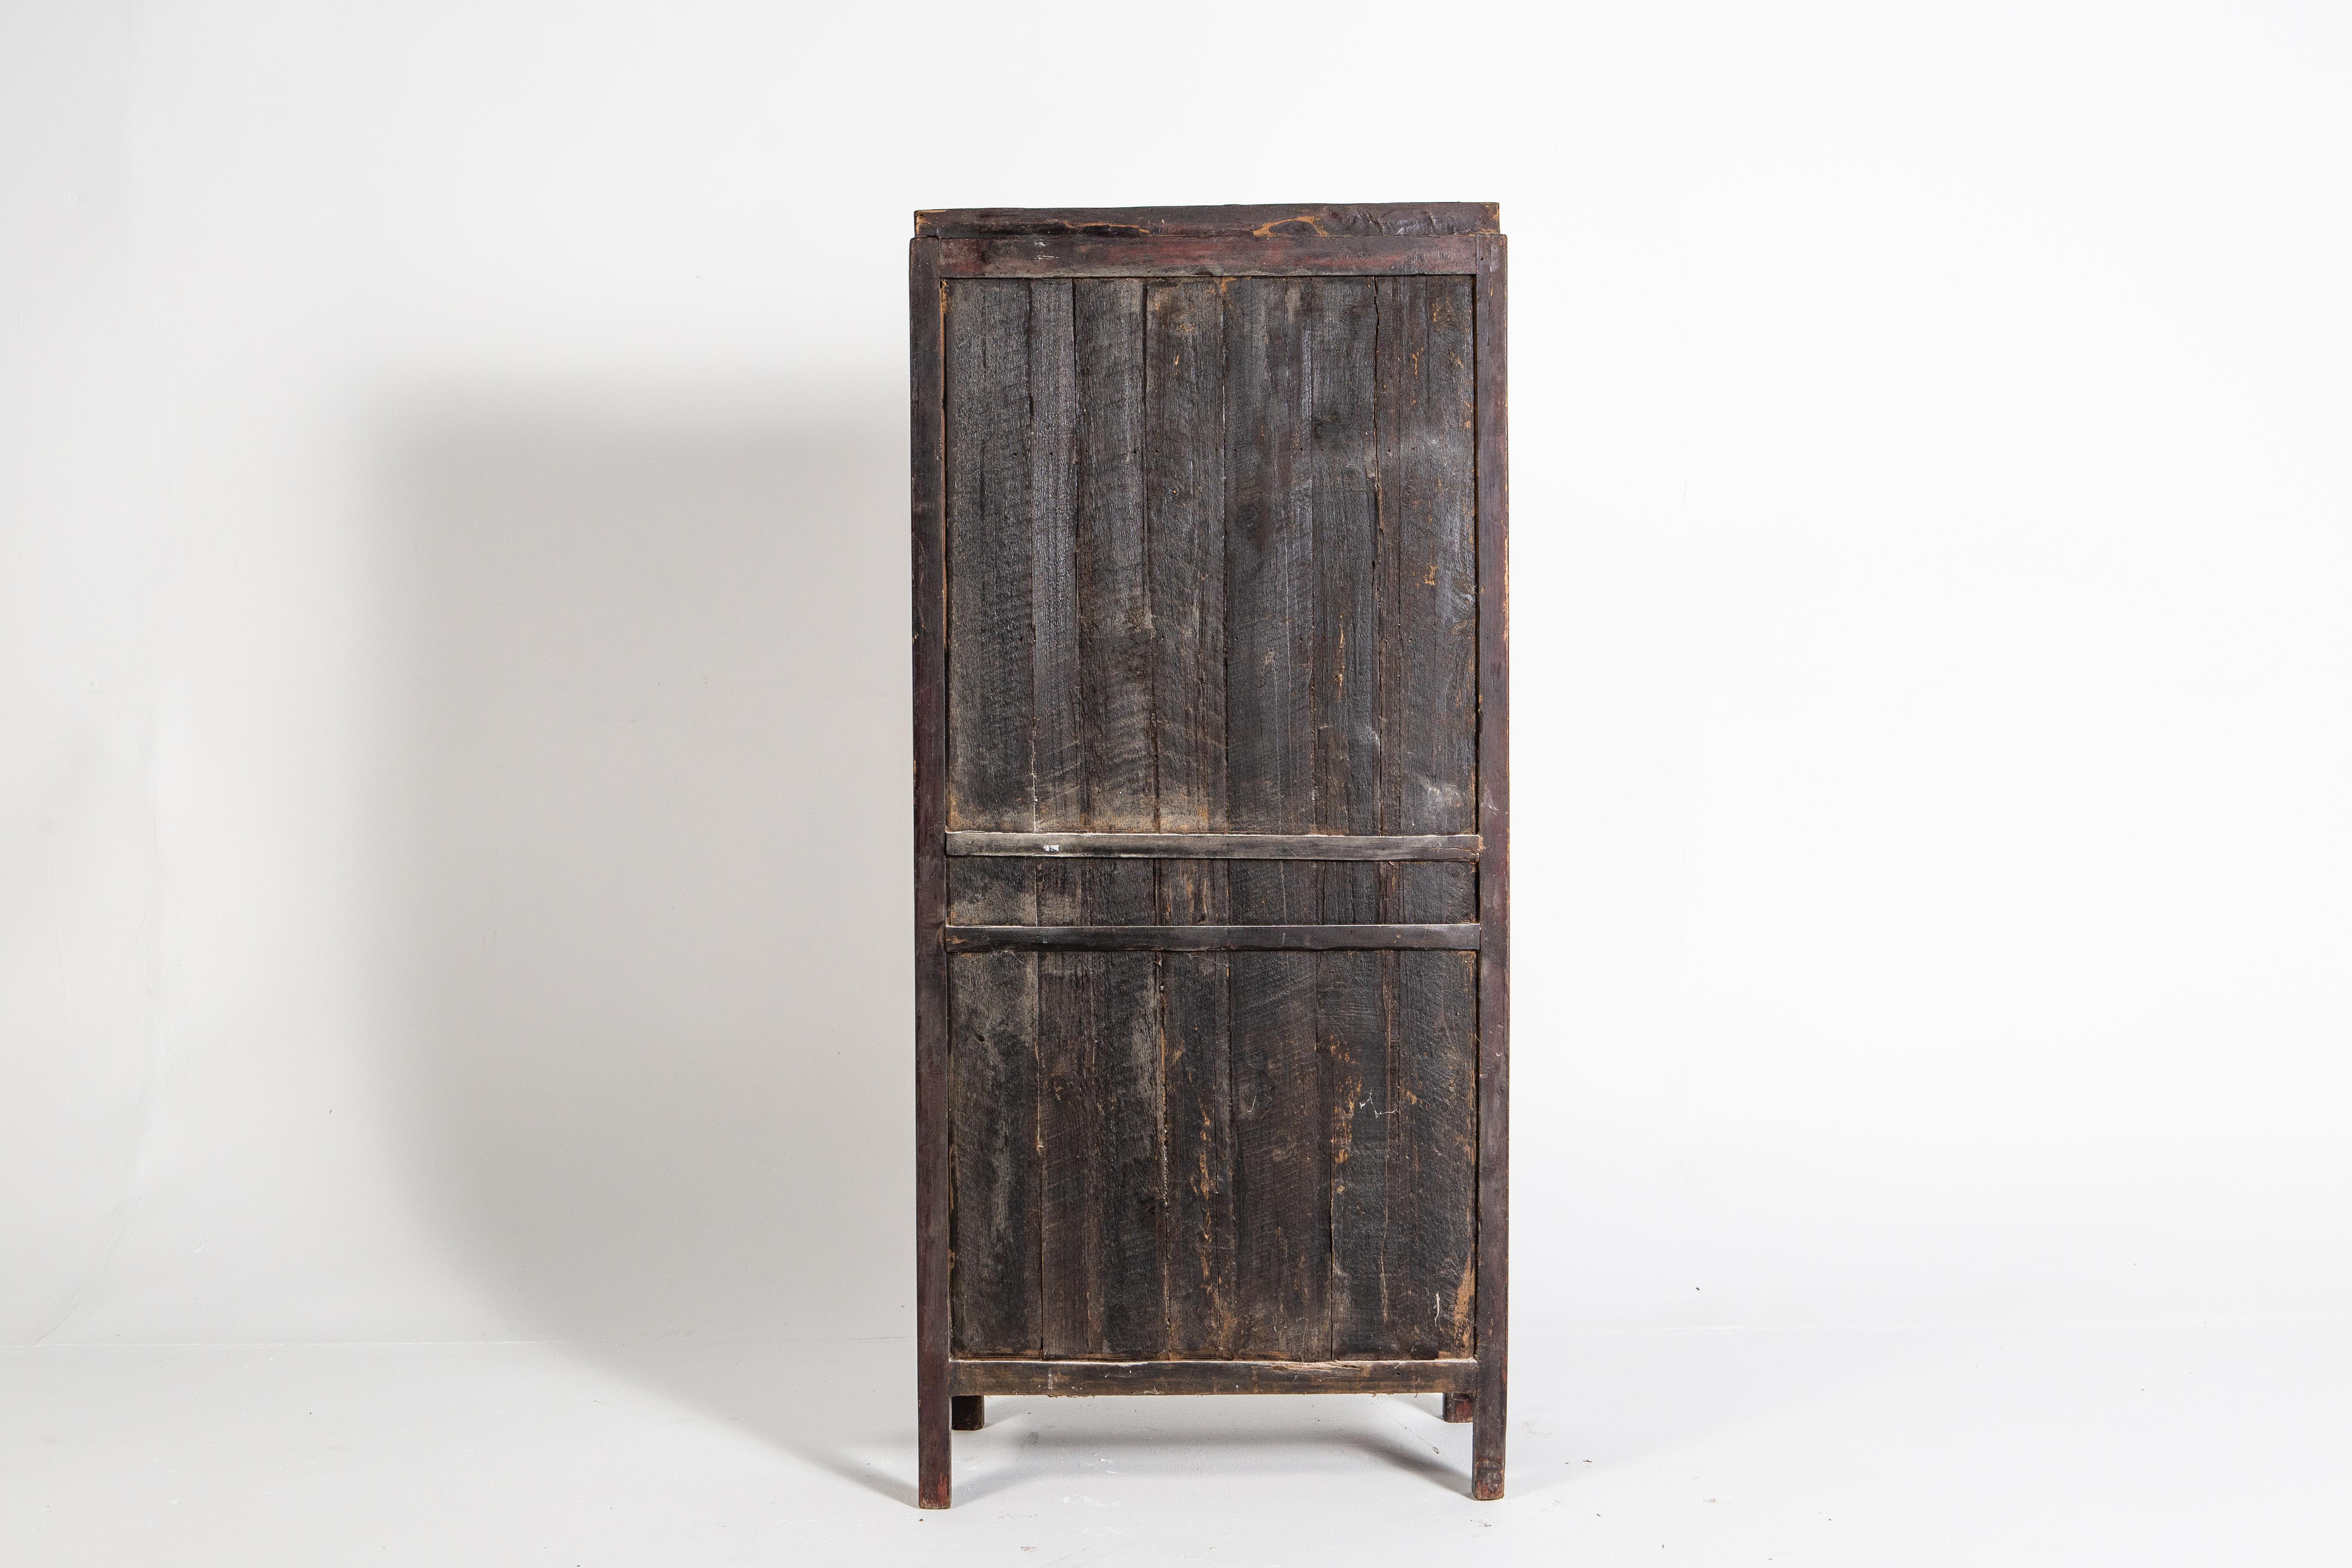 This lattice door cabinet came from Jiangsu, China and dates to the late 1900s. It was originally used to provide extra storage in the dining or sleeping areas of a home. It is made from Fir wood, covered in oxblood lacquer. Oxblood is one of the